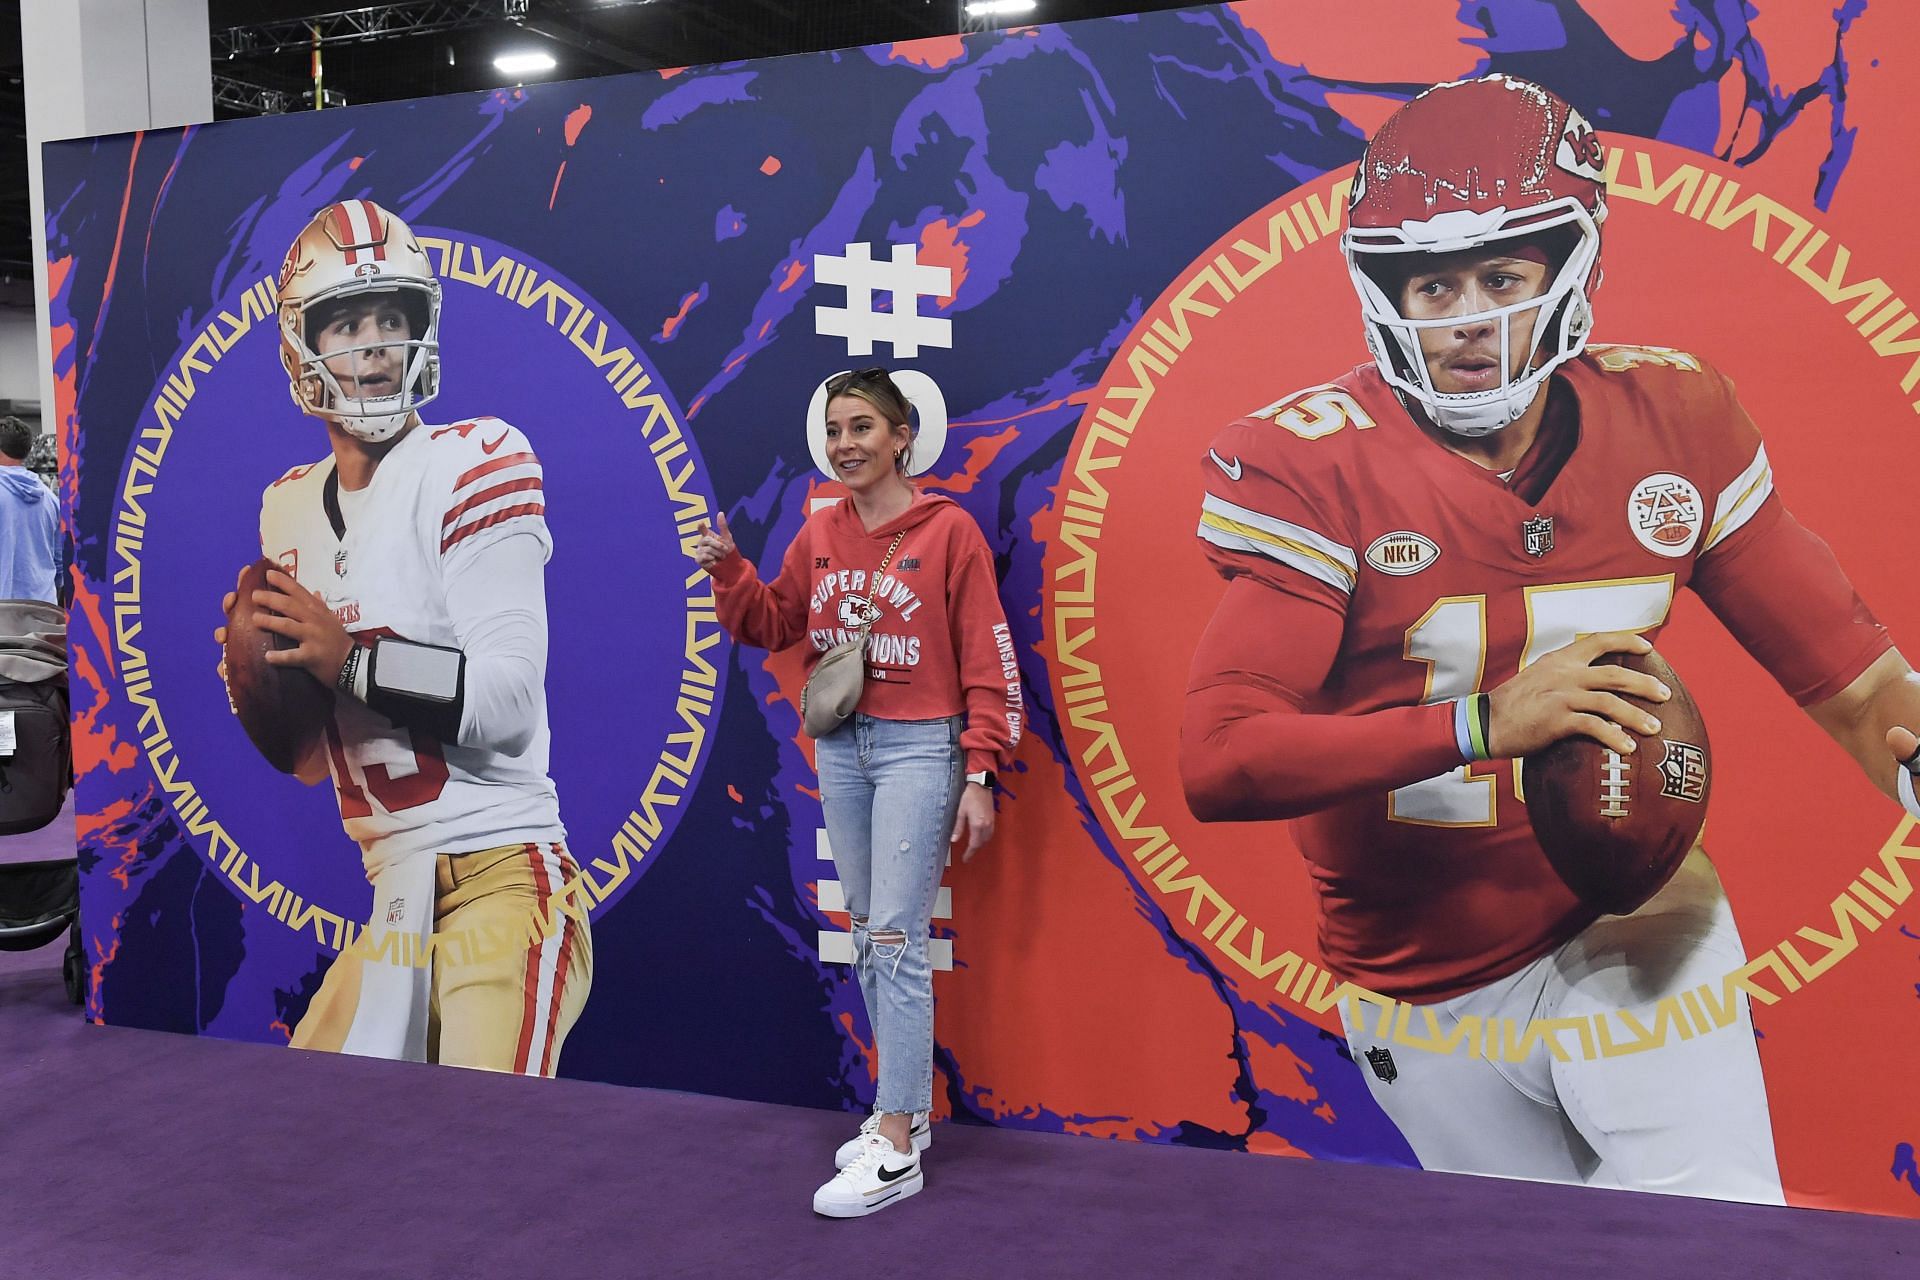 Fan stands in front of Mahomes-Purdy display at NFL experience in Las Vegas